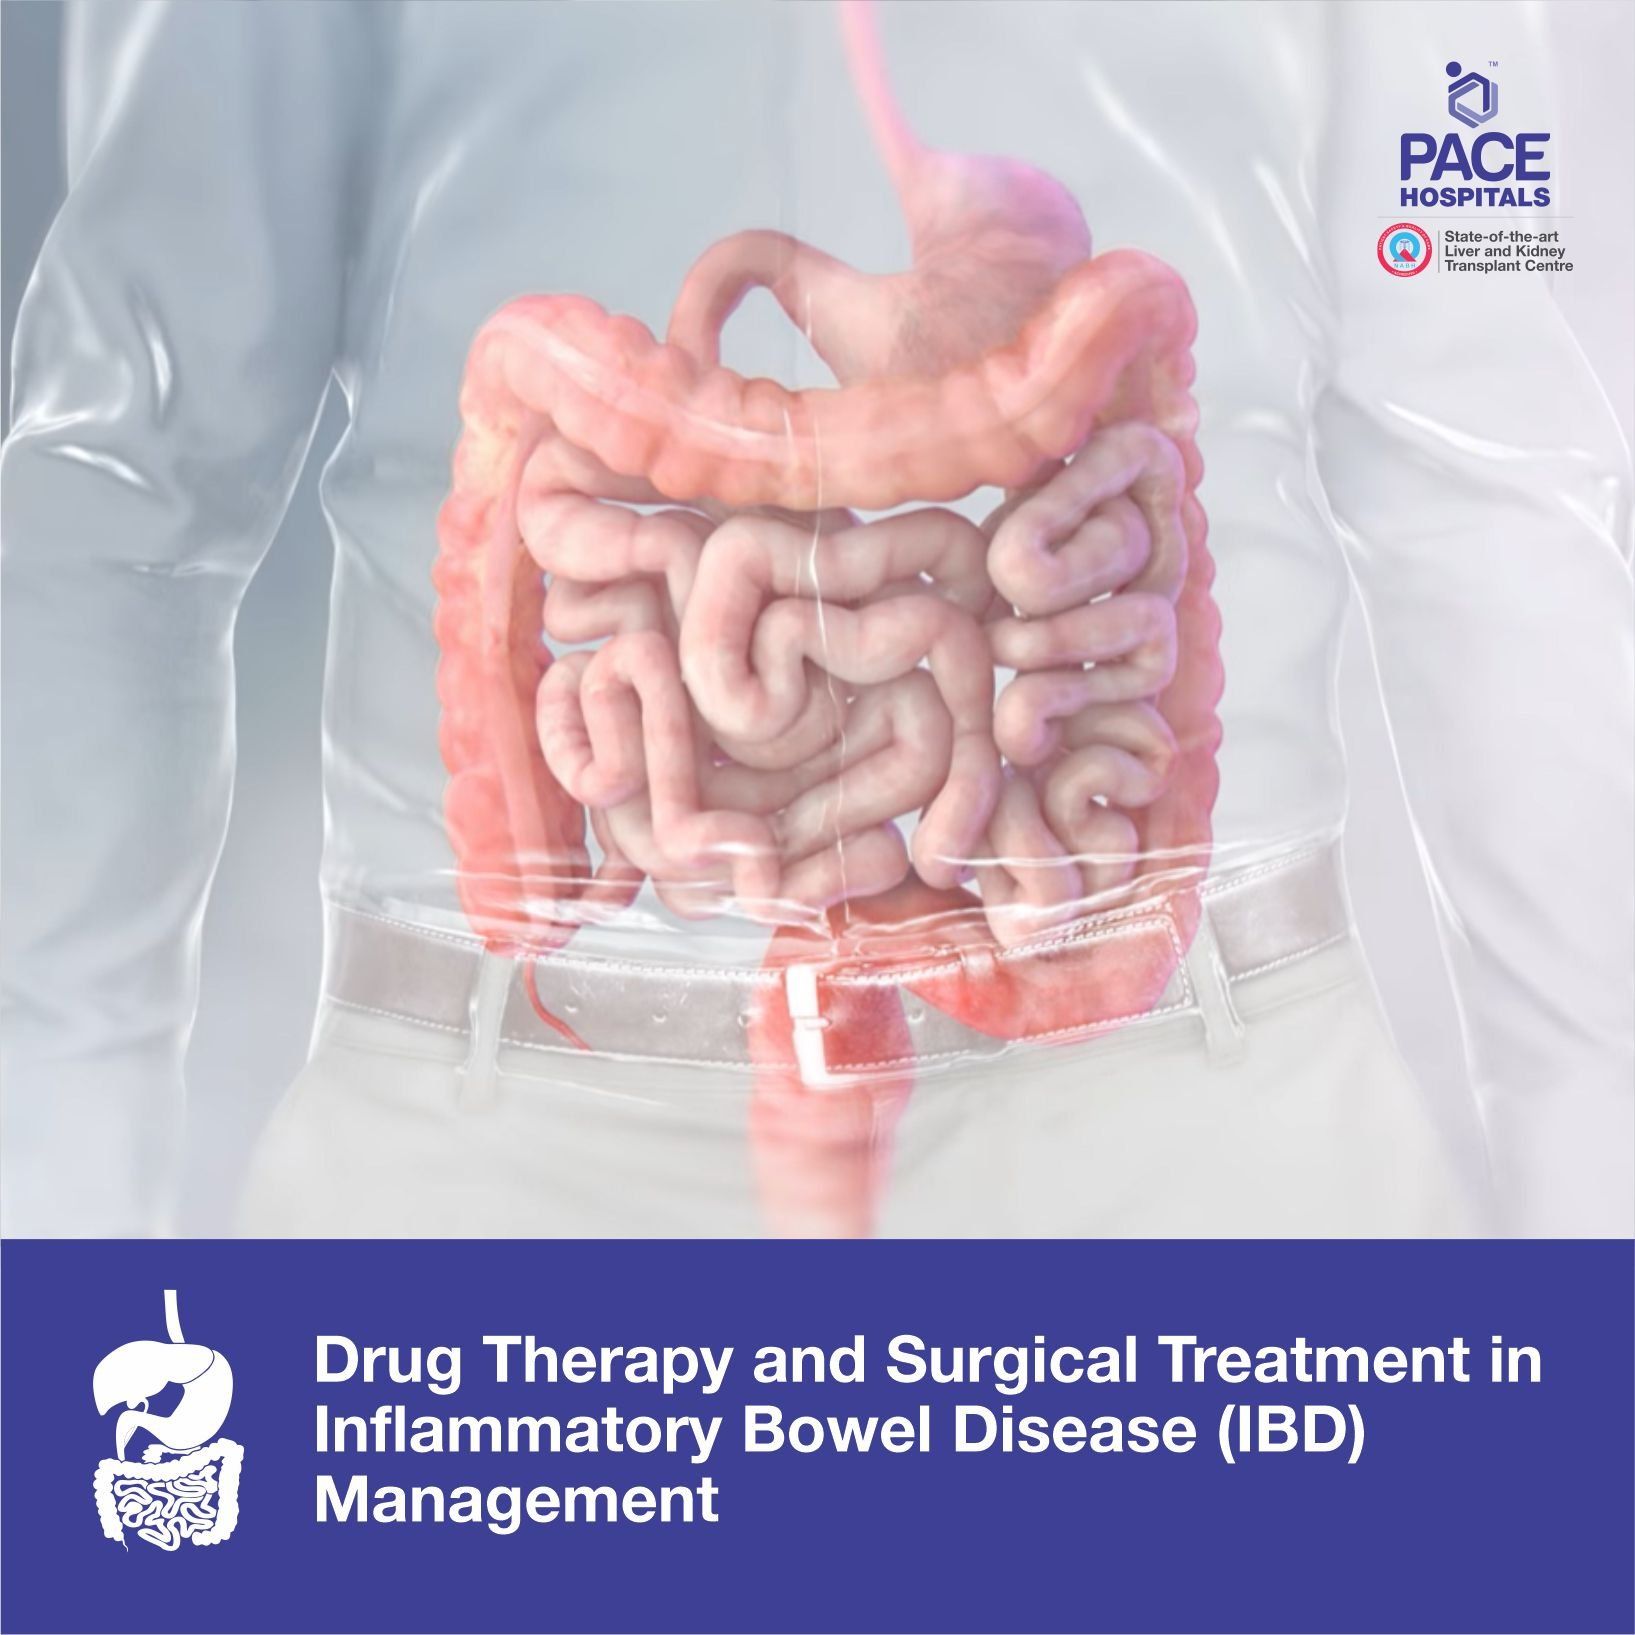 Drug Therapy and Surgical Treatment in Inflammatory Bowel Disease (Ulcerative colitis and Crohn's disease) Management